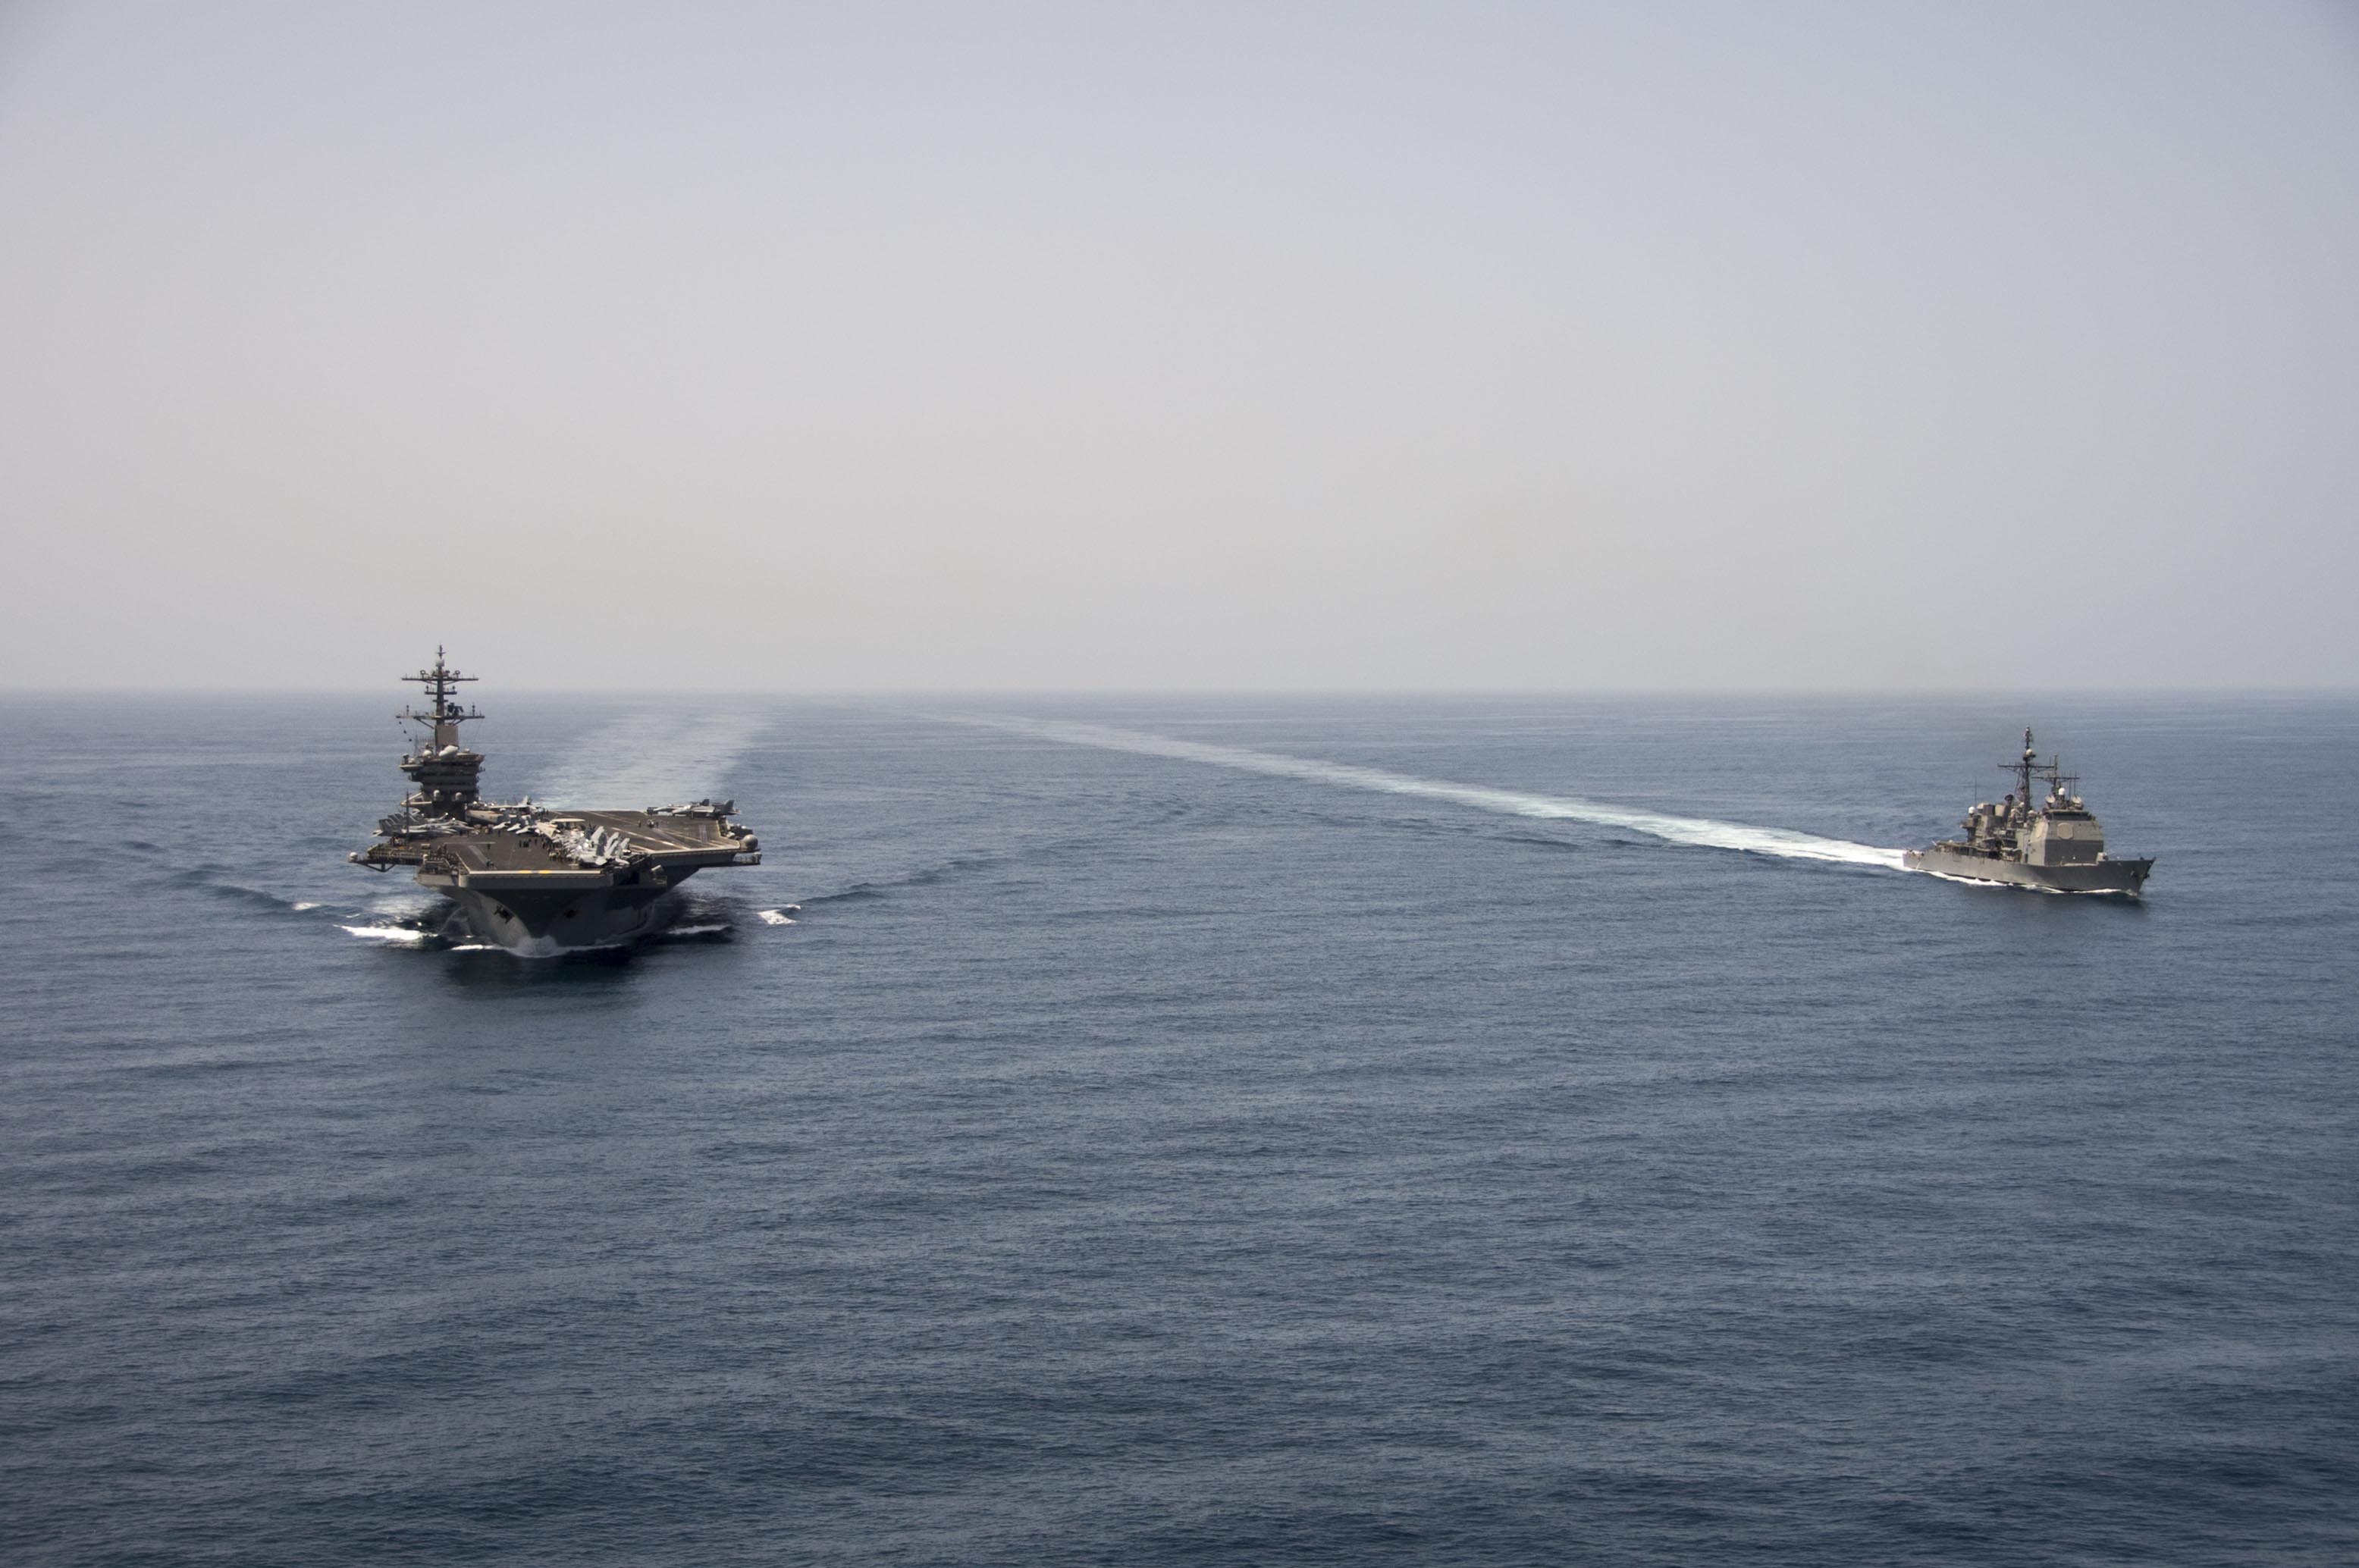 USS Theodore Roosevelt (CVN 71) and the guided-missile cruiser USS Normandy (CG 60) operate in the Arabian Sea on April 21, 2015. US Navy Photo